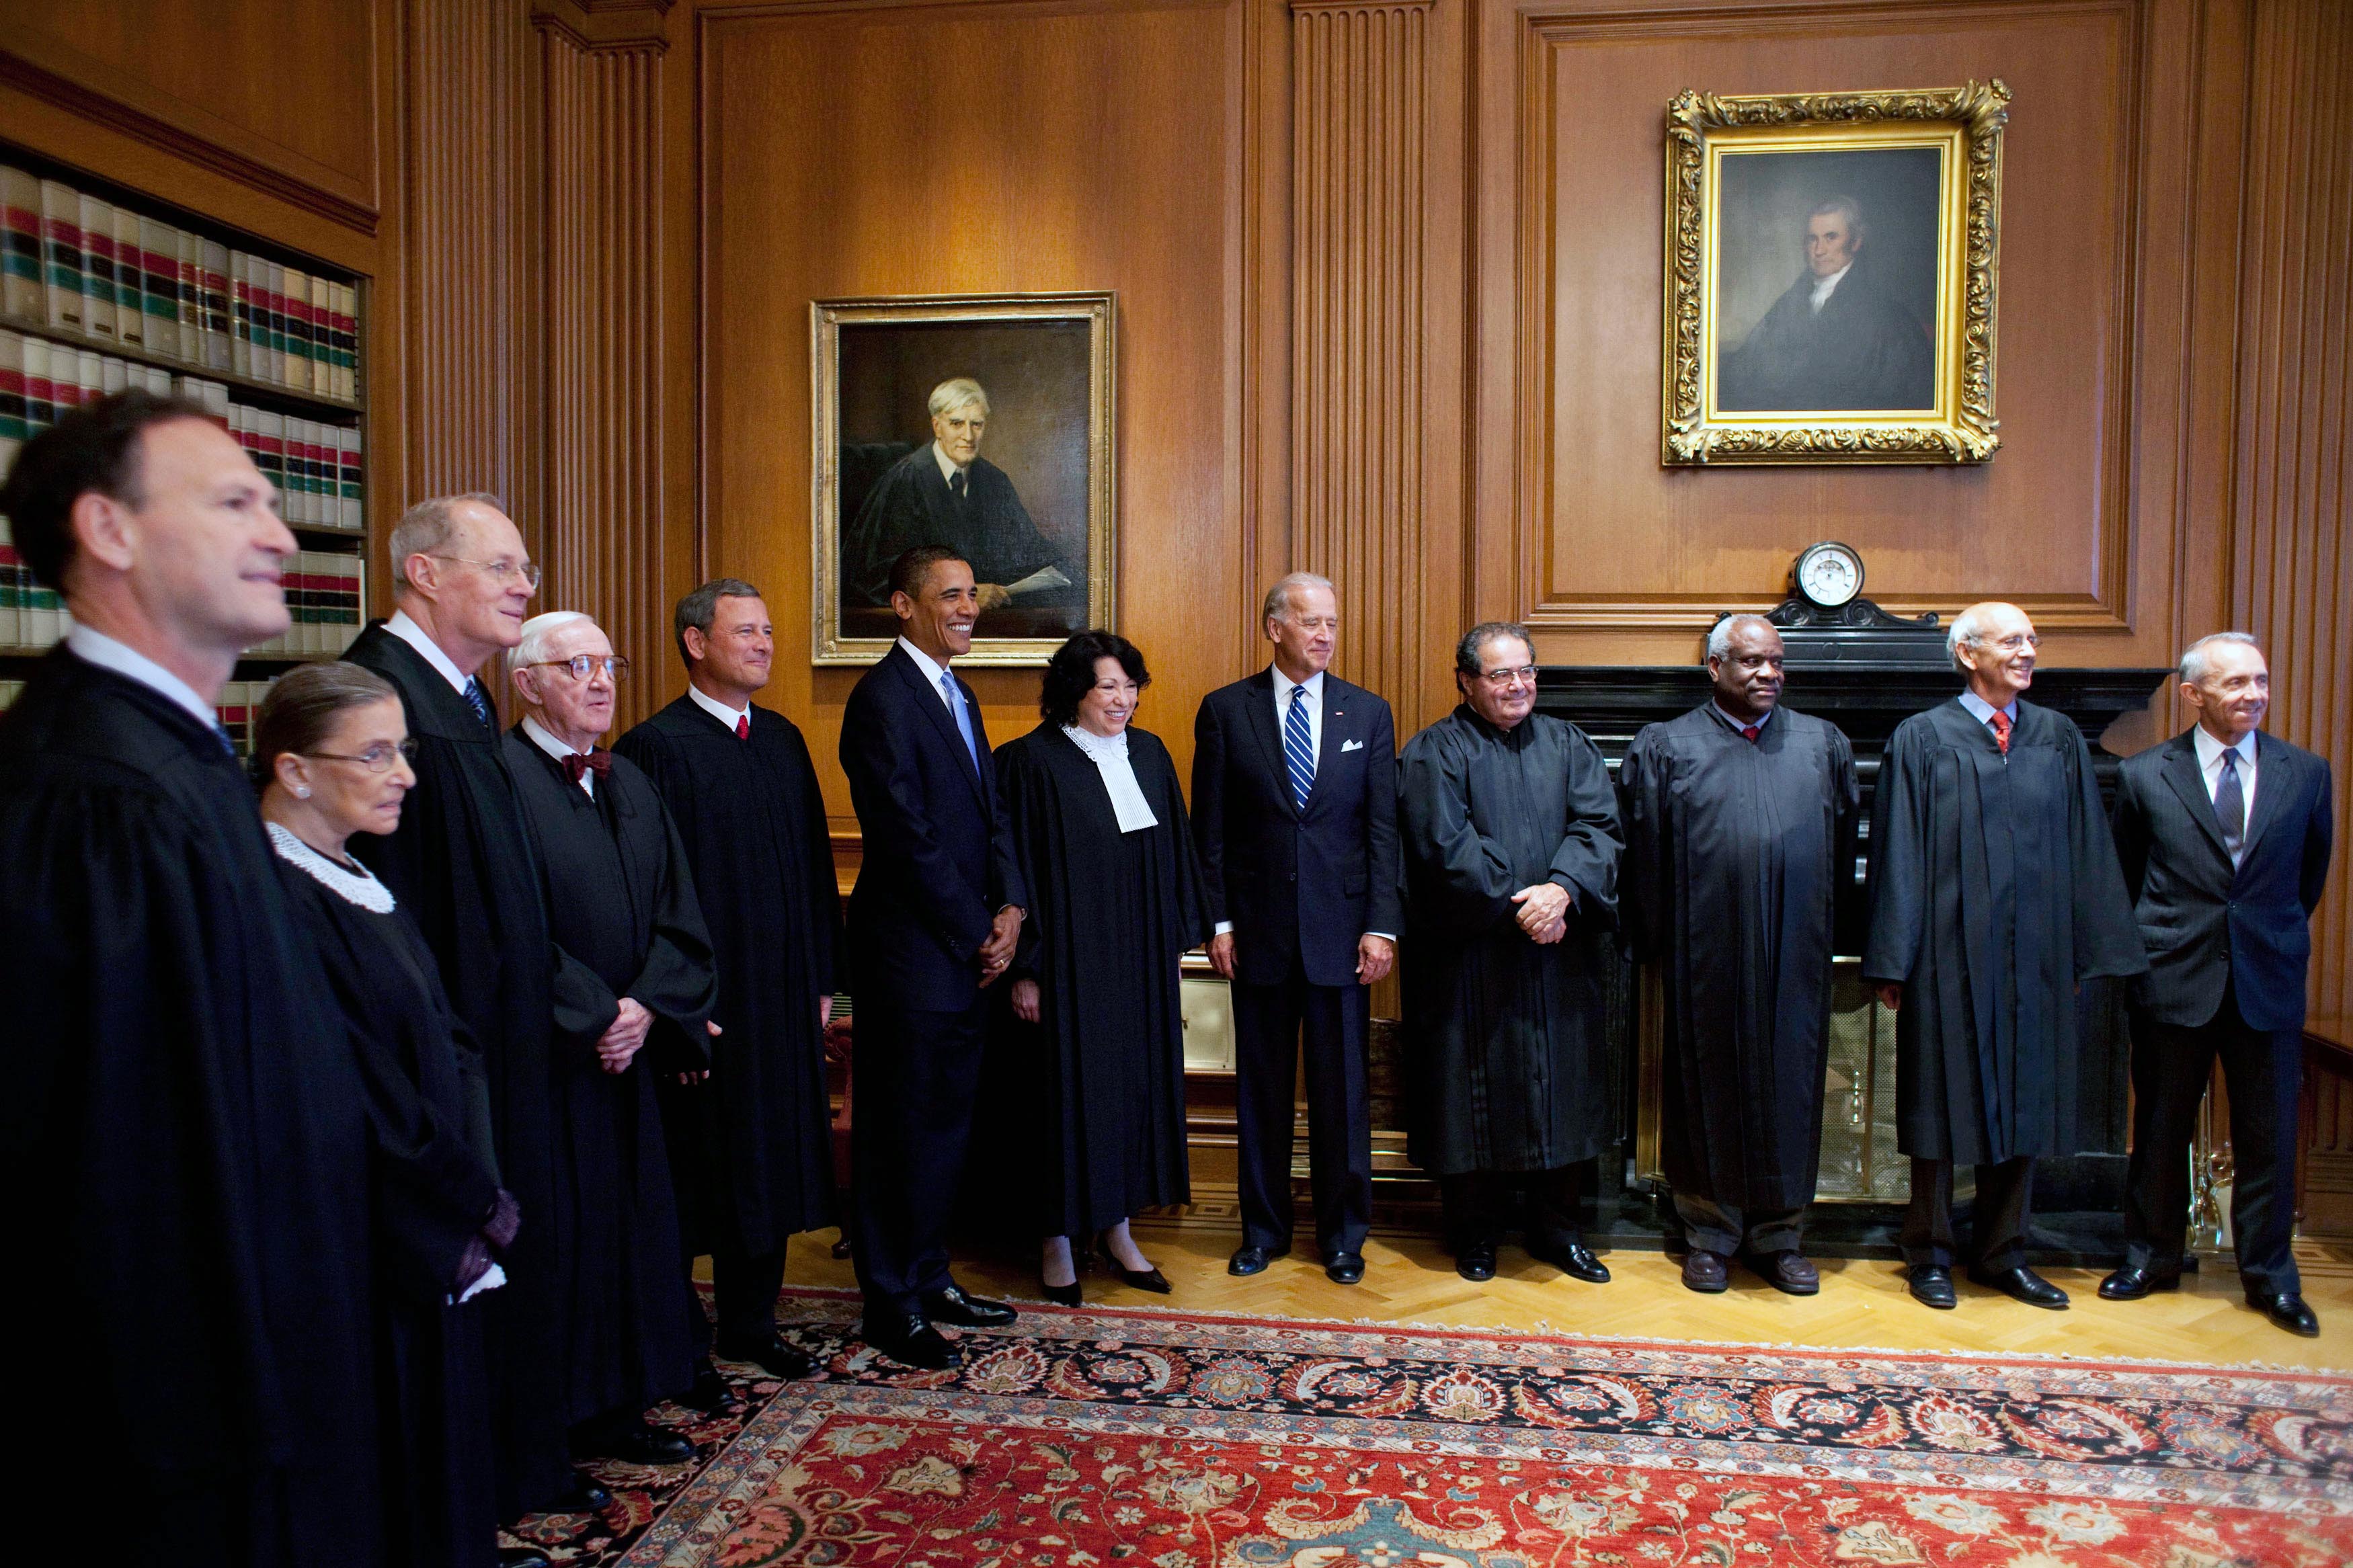 Former President Barack Obama and former Vice President Joe Biden meet with members of the Supreme Court on September 8, 2009. (Pete Souza/White House via Getty Images)